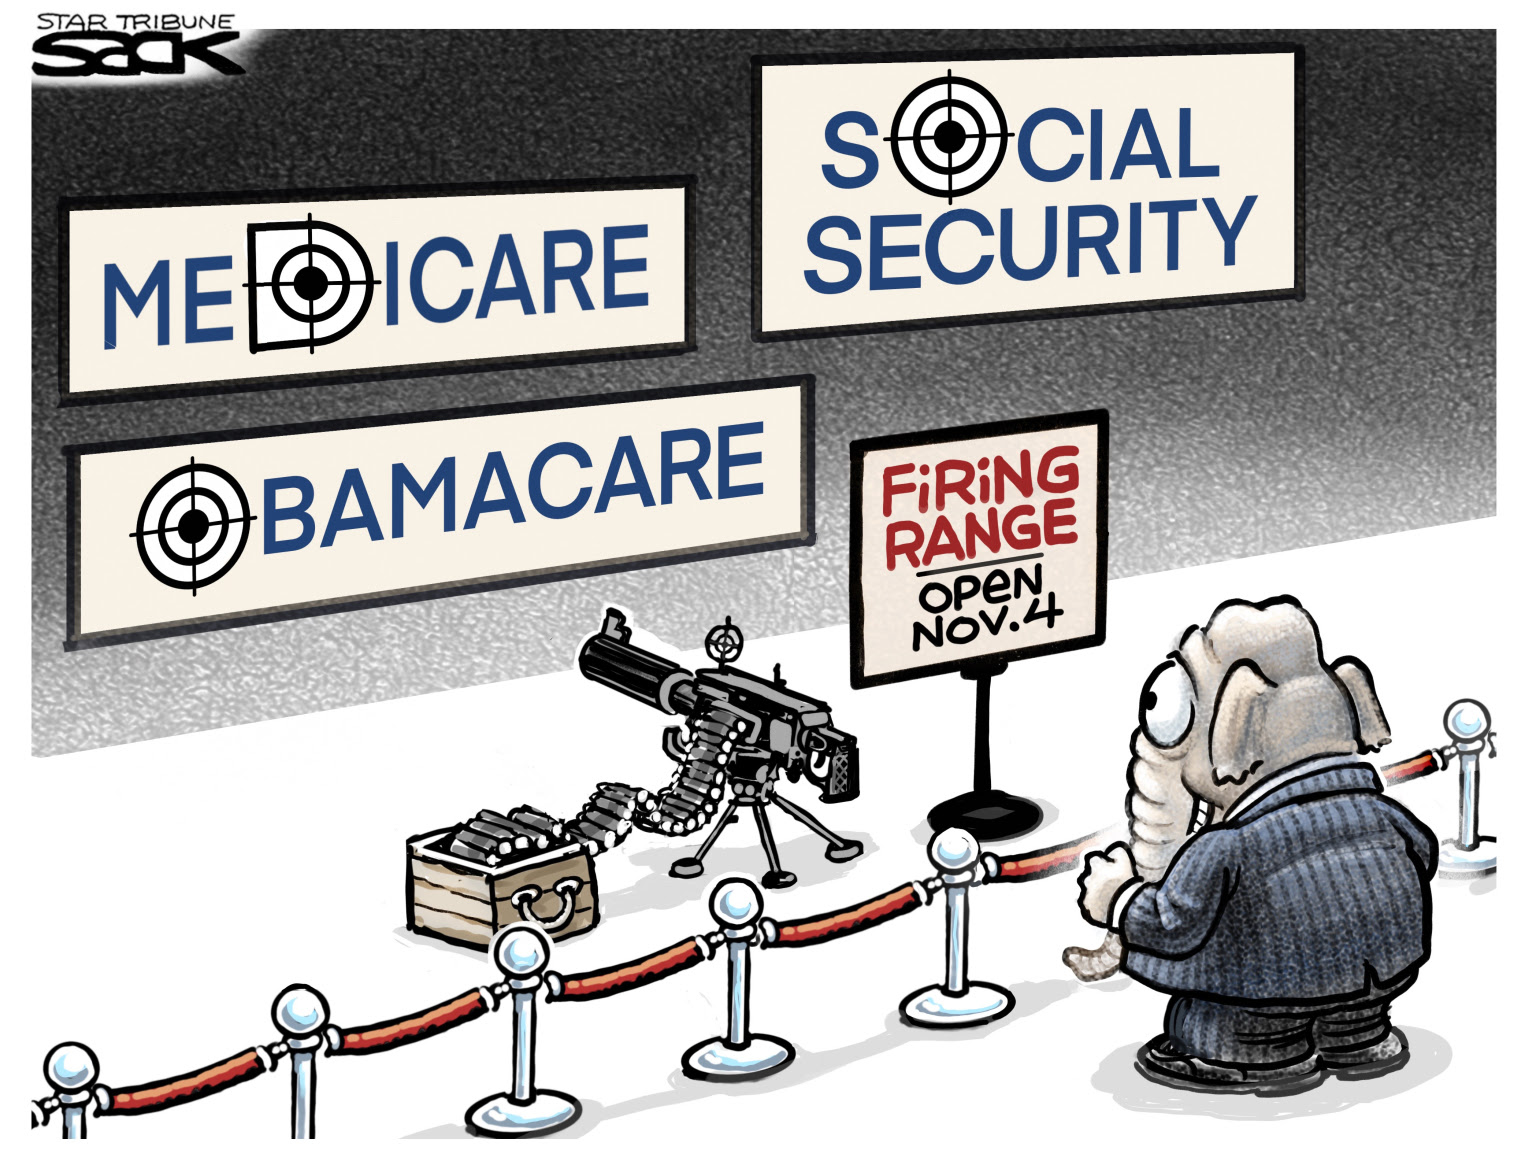 Republicans plan to kill Medicare and Social Security